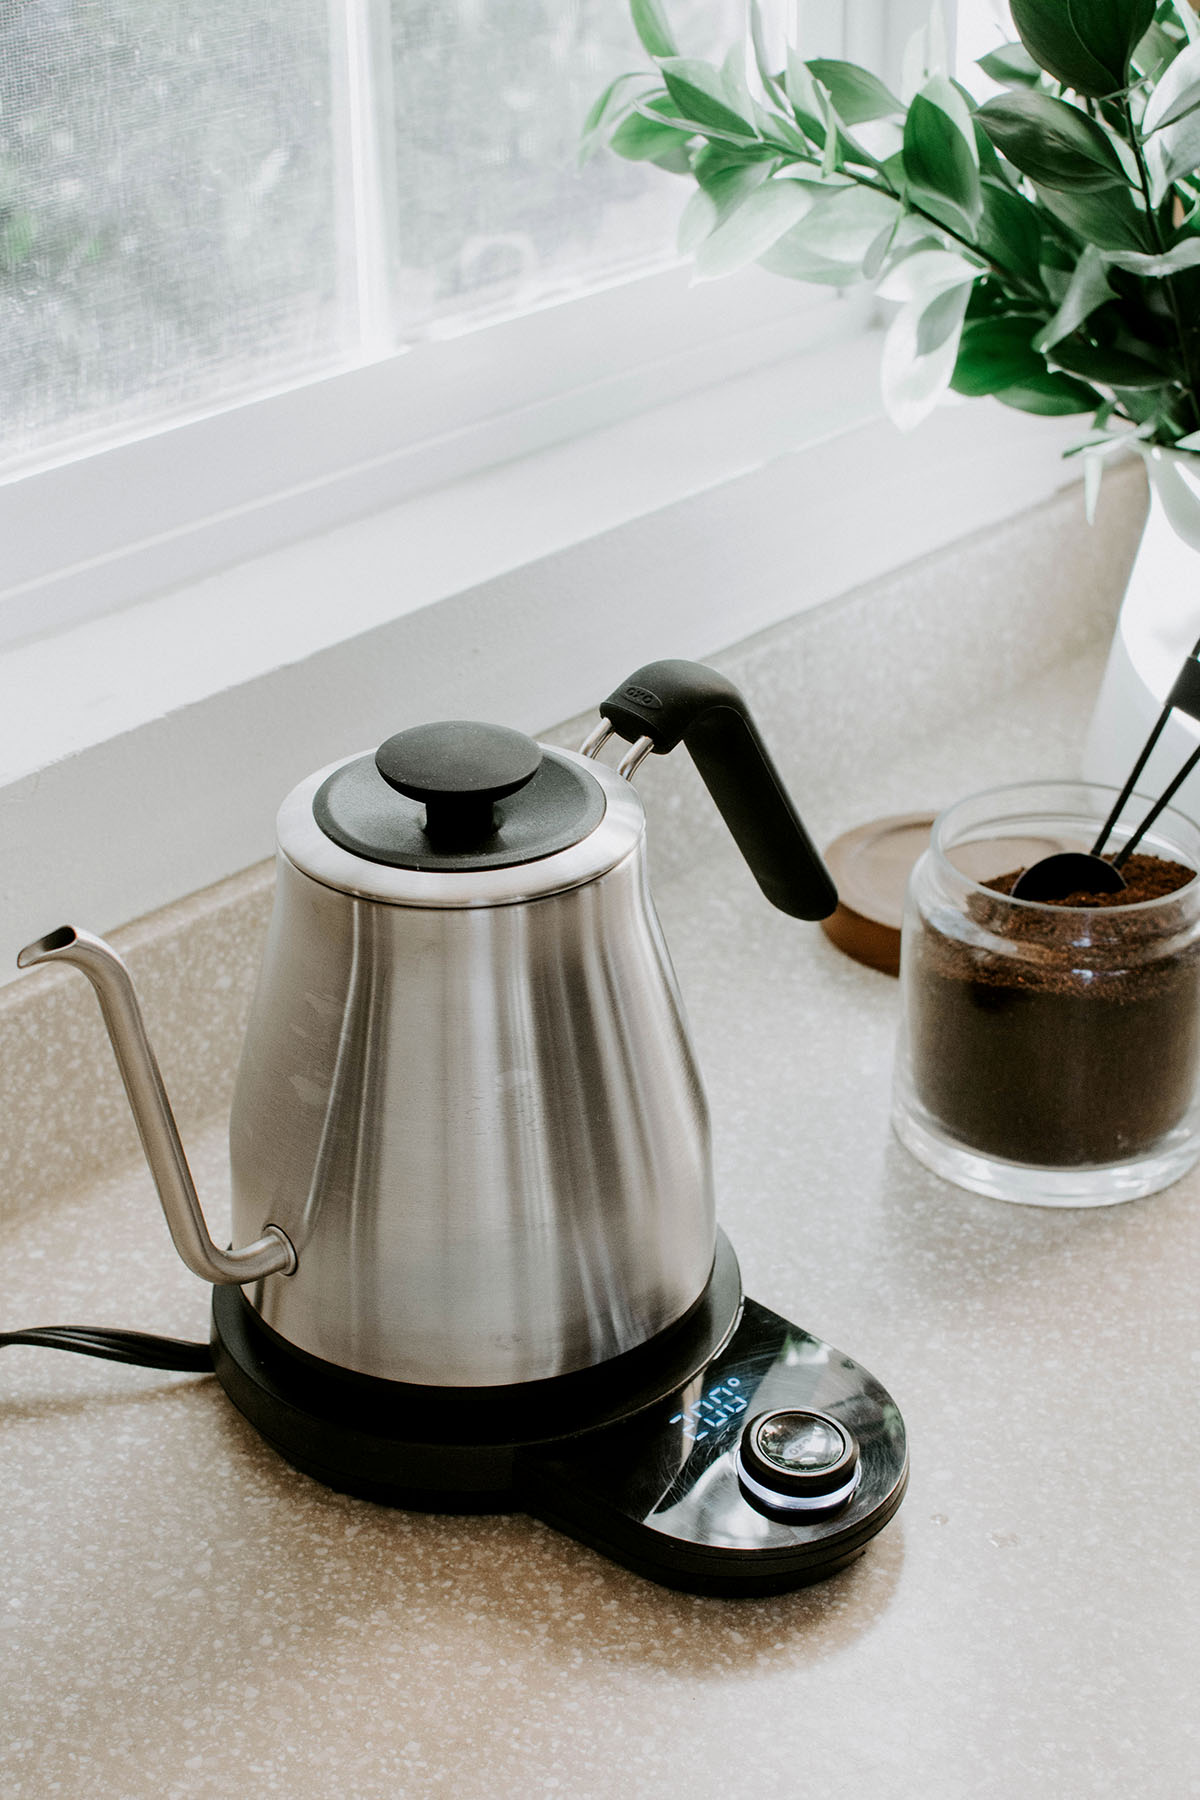 https://www.homeyohmy.com/wp-content/uploads/2019/12/pour-over-kettle.jpg